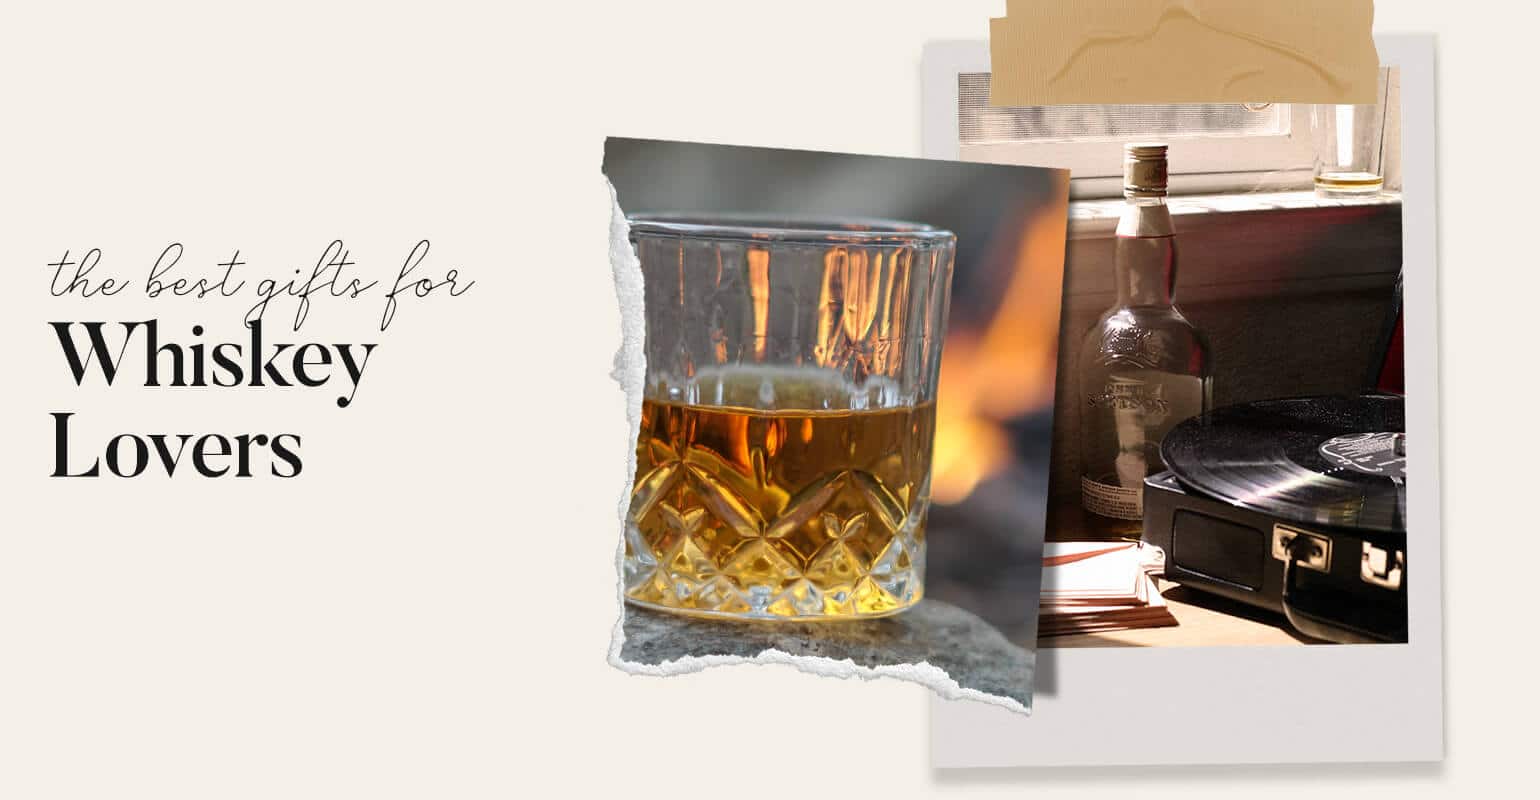 10 Gifts for Whiskey Lovers That Are Pretty Neat